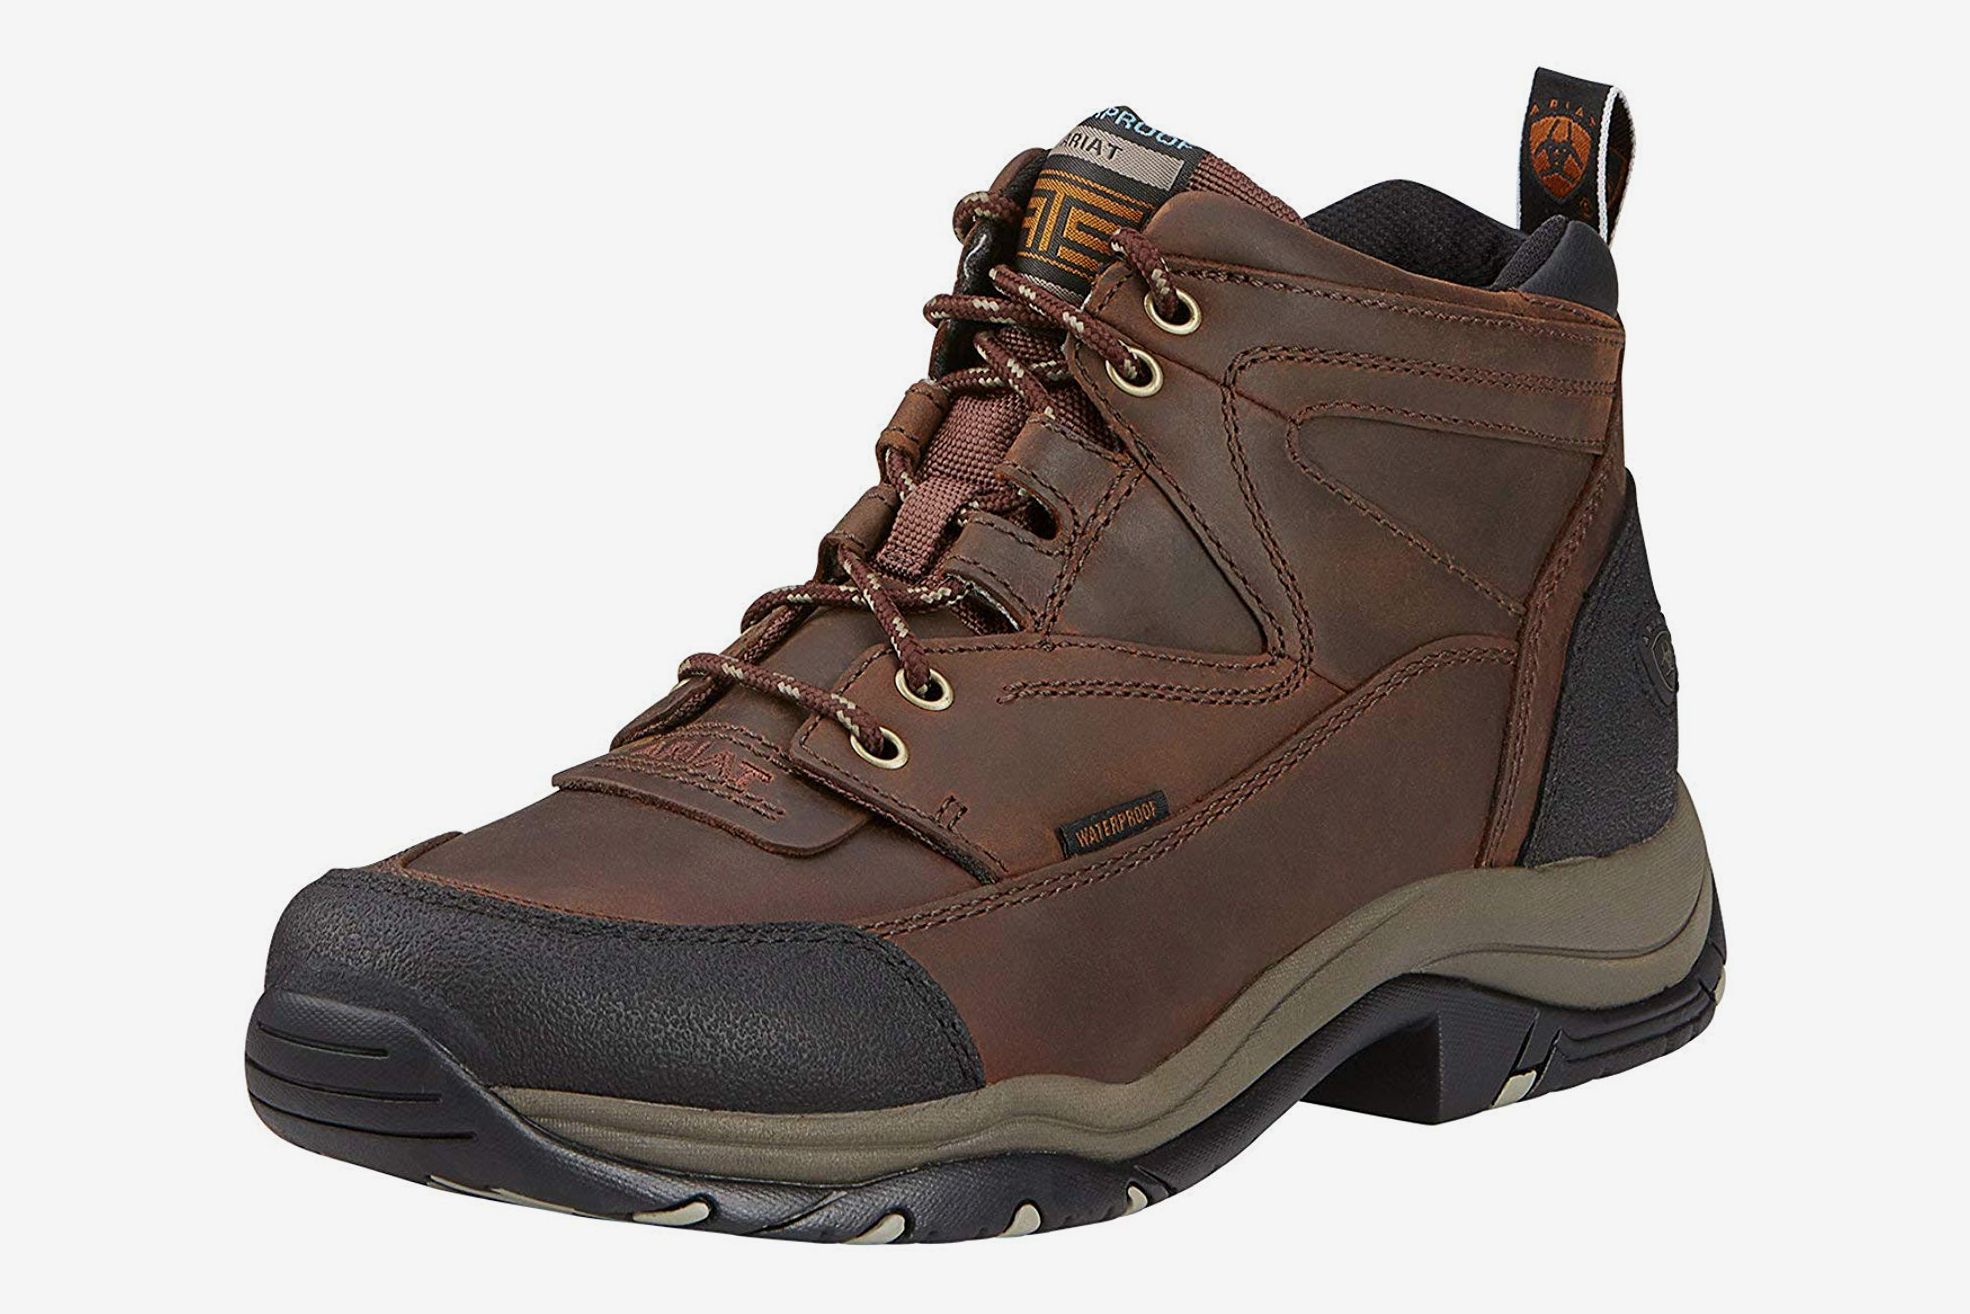 Buy > hiking boots best > in stock